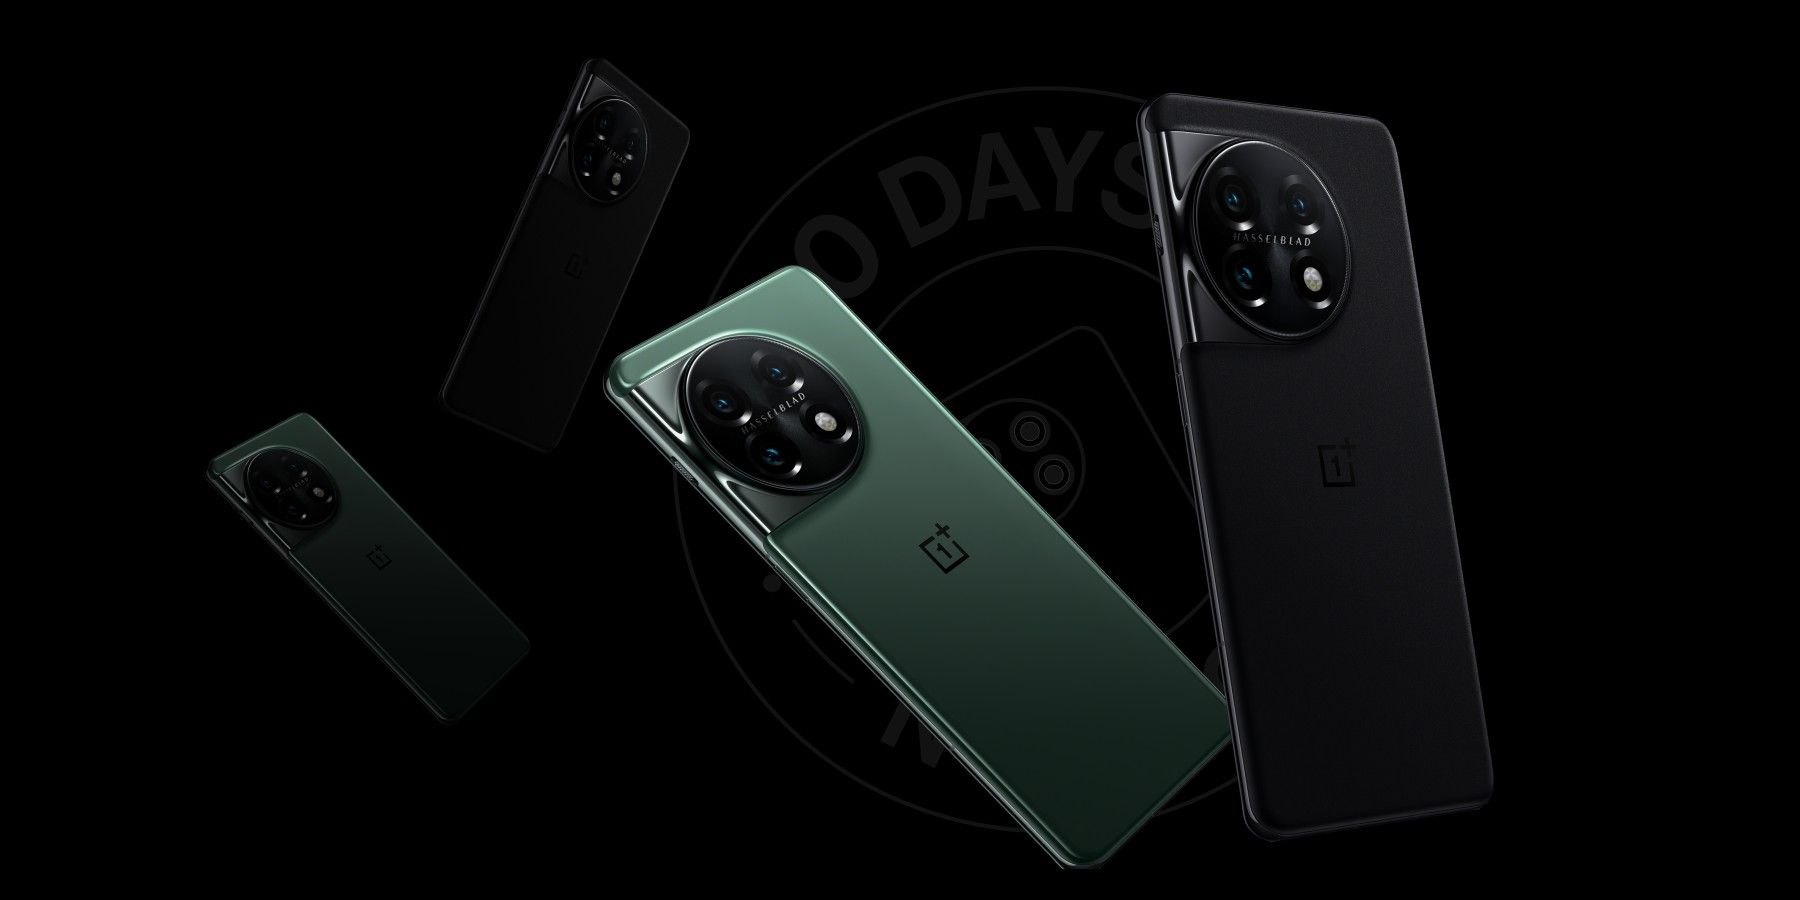 A photo showing the OnePlus 11 in green and black